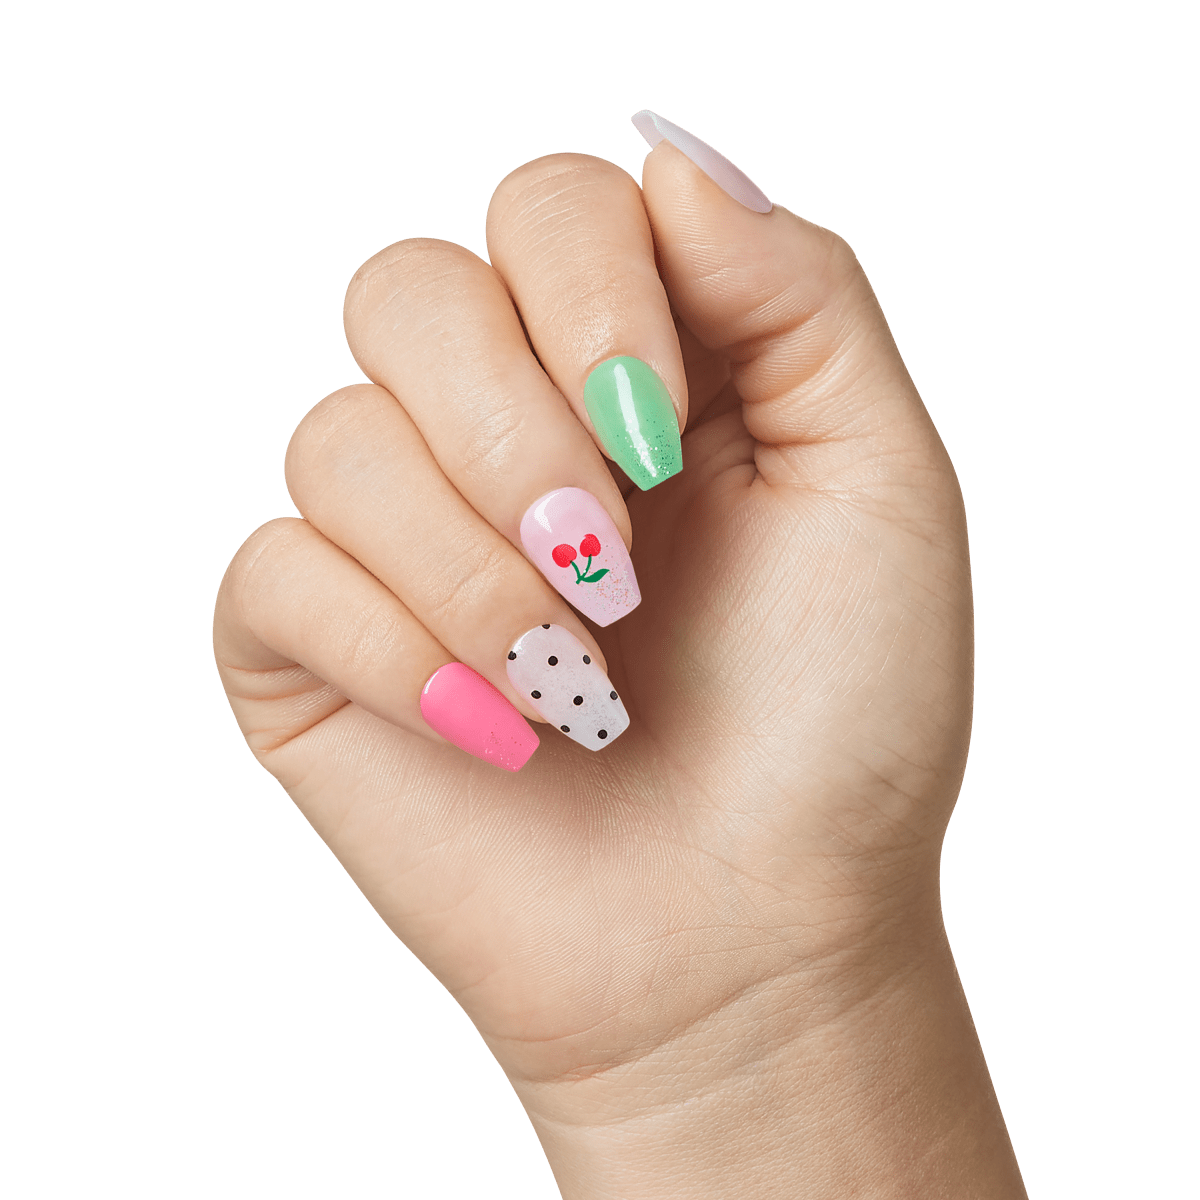 30 Cute and On-Trend Pink Nail Art Designs for 2023